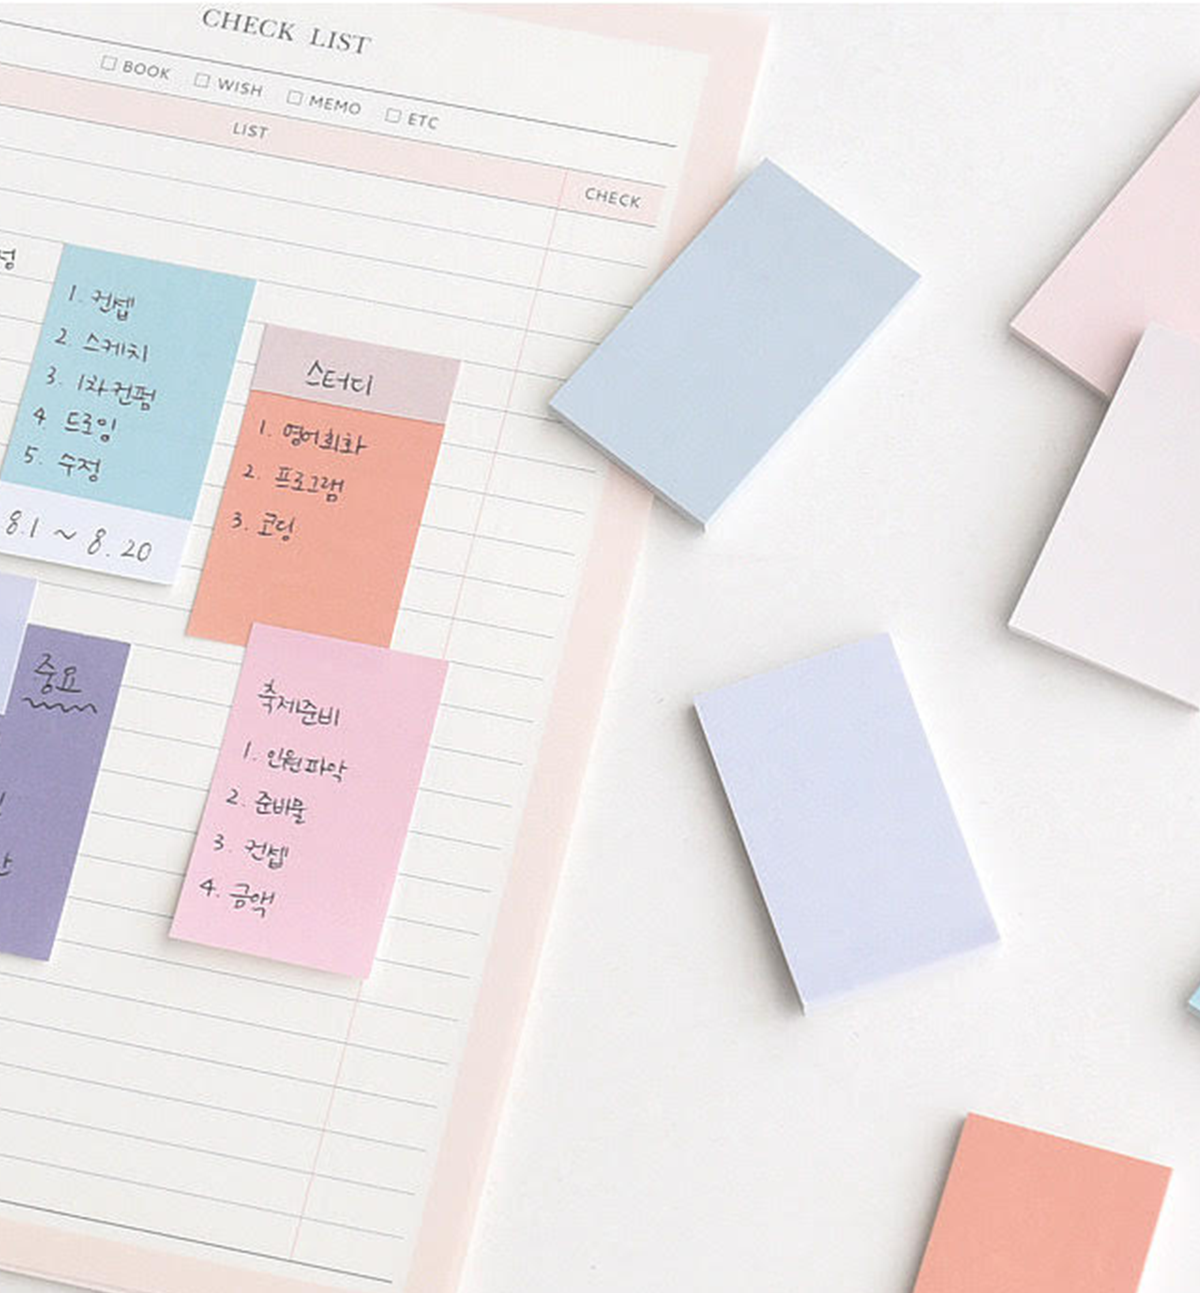 Color Pallette Sticky Notes [Solid 401]